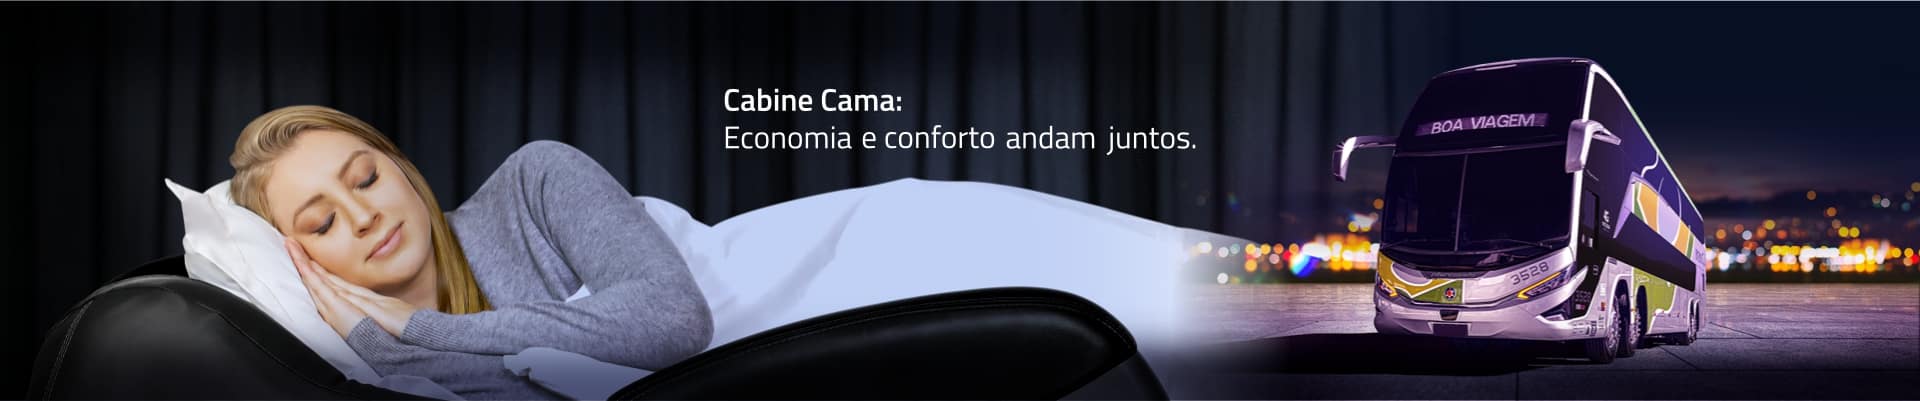 bs-cabine-cama-banner-home-1920x400px